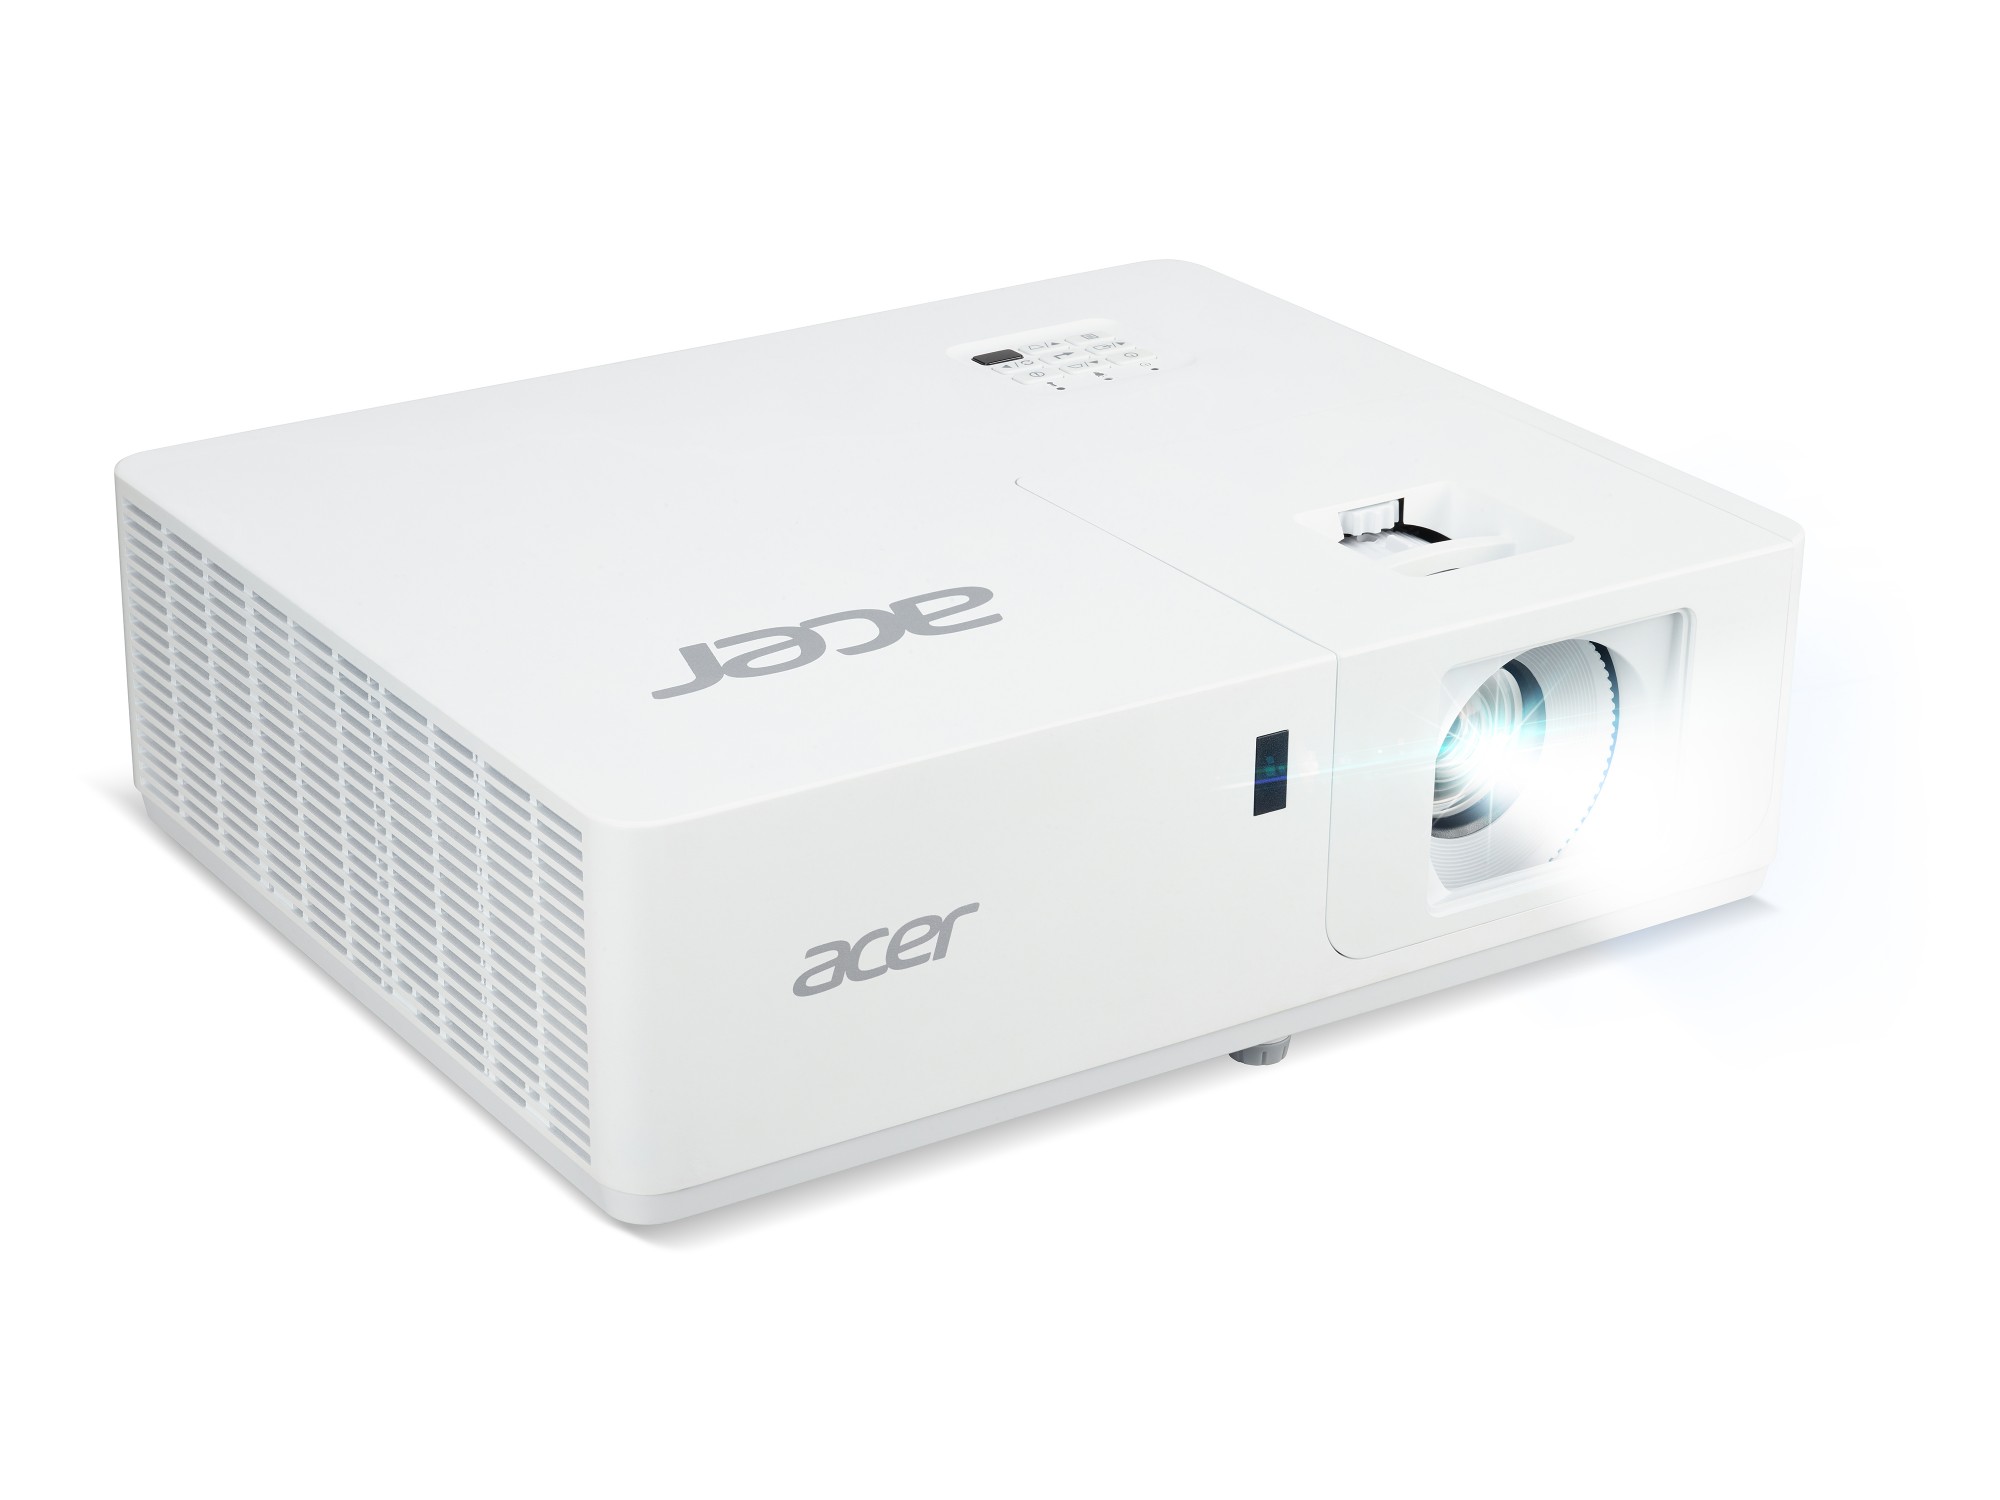 Acer Large Venue PL6510 Projector - 5500 Lumens - Full HD 1080p